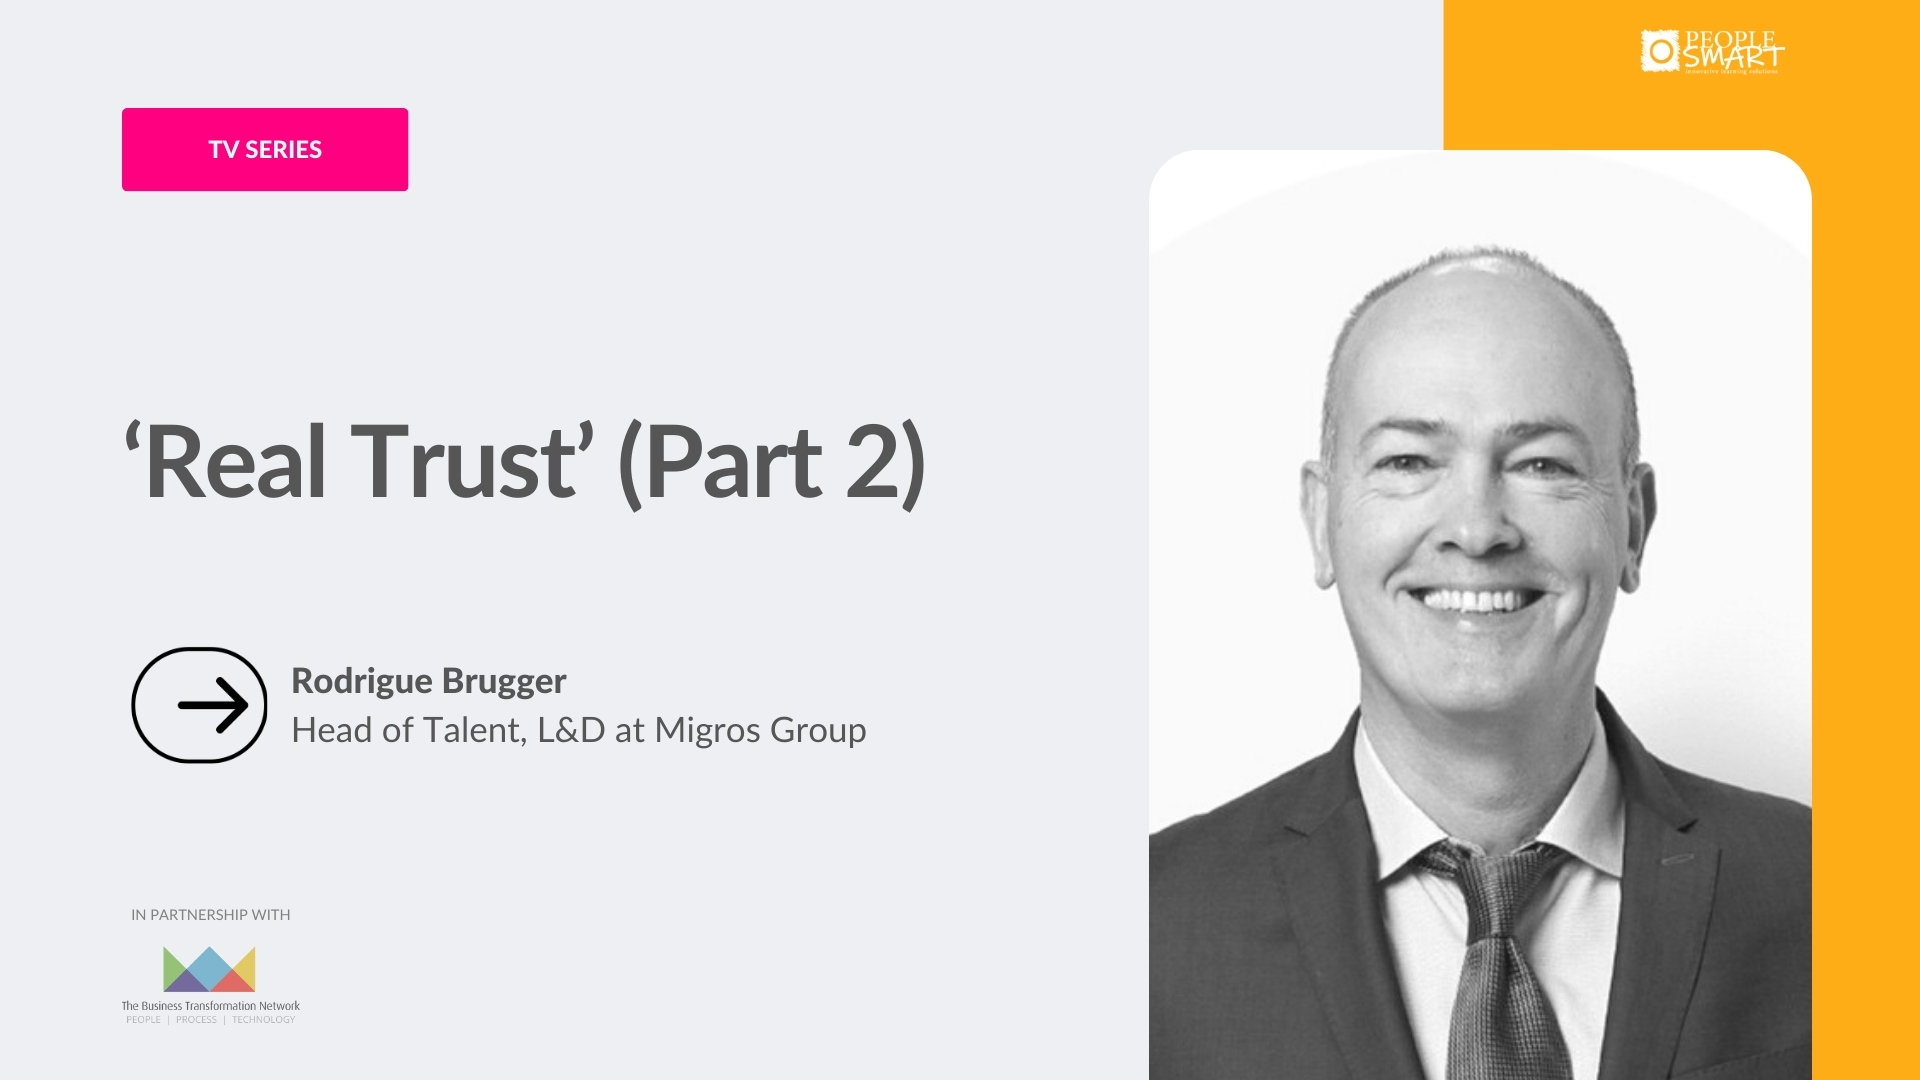 ‘Real Trust’ with Rodrigue Brugger (Part 2)